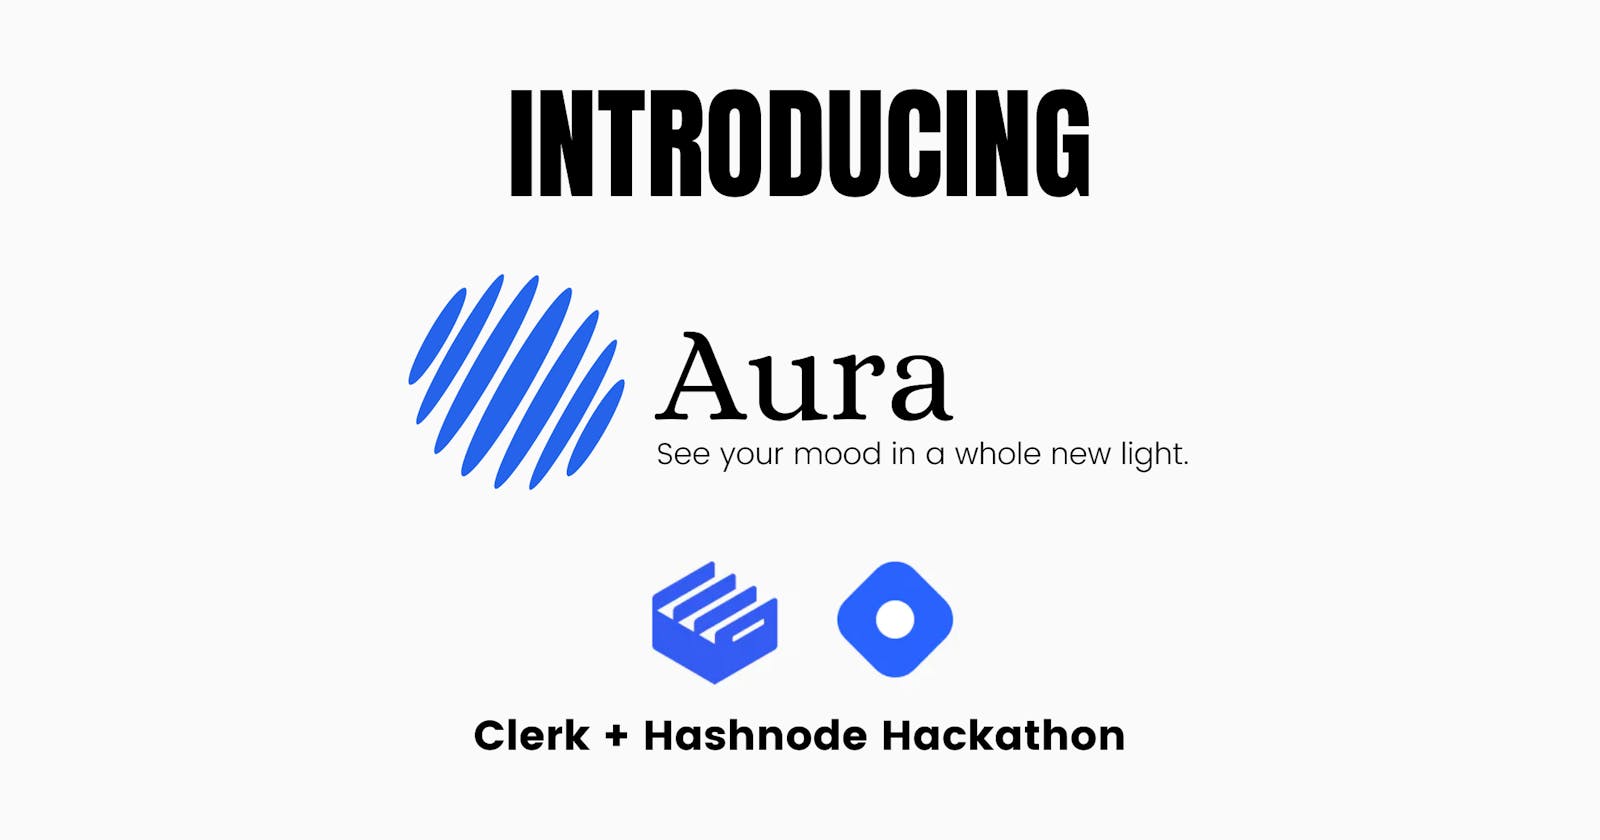 Introducing Aura: See your mood in a whole new light.